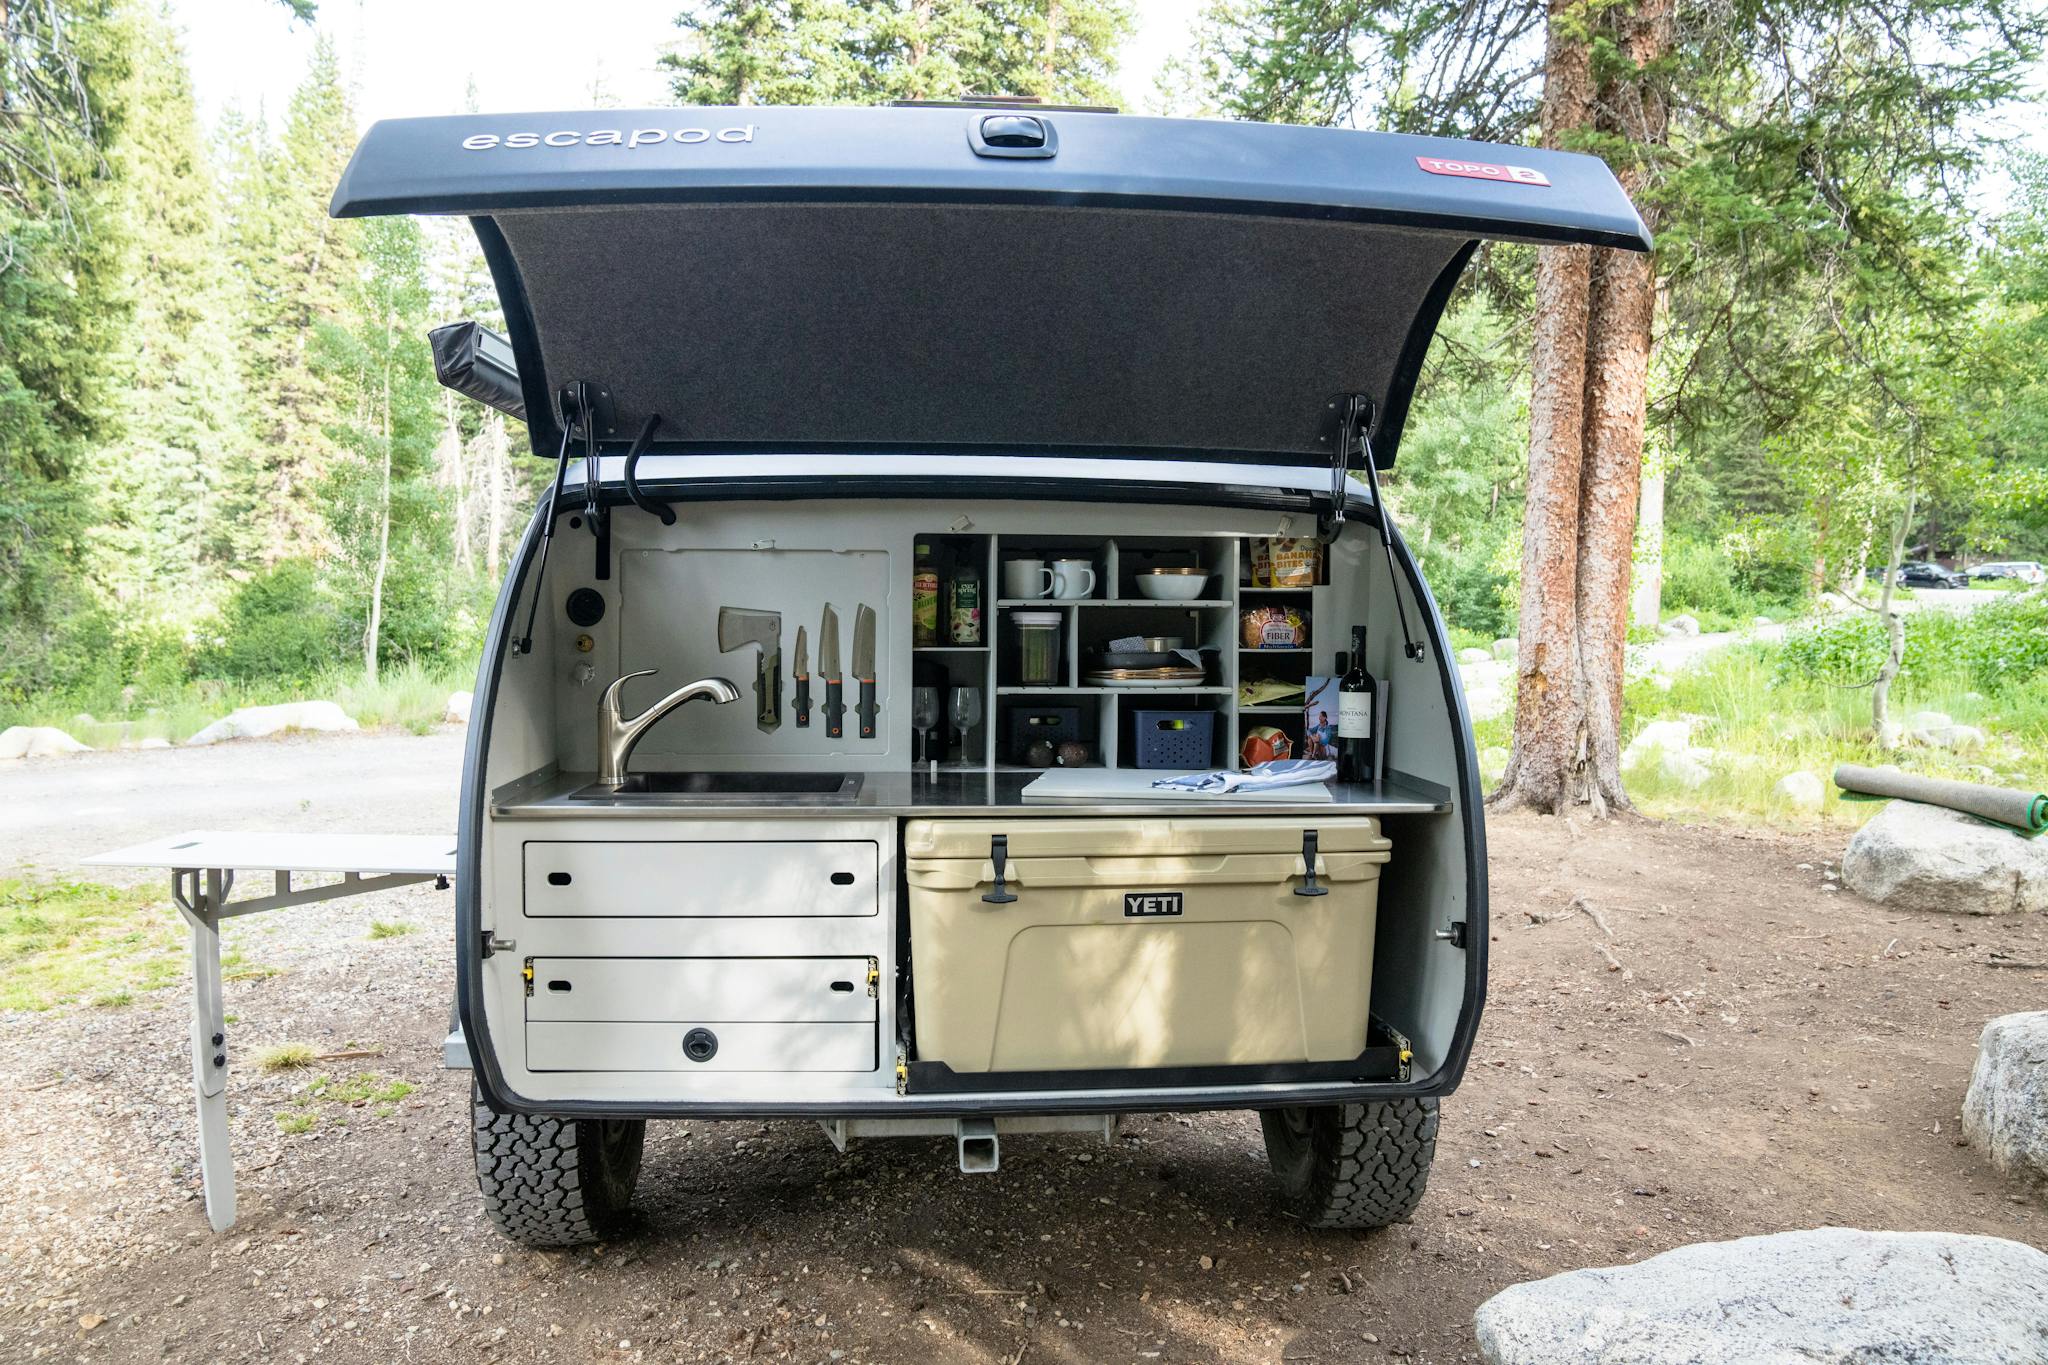 A teardrop trailer with a full kitchen set-up. A sink, YETI cooler, storage, and two-burner stove.